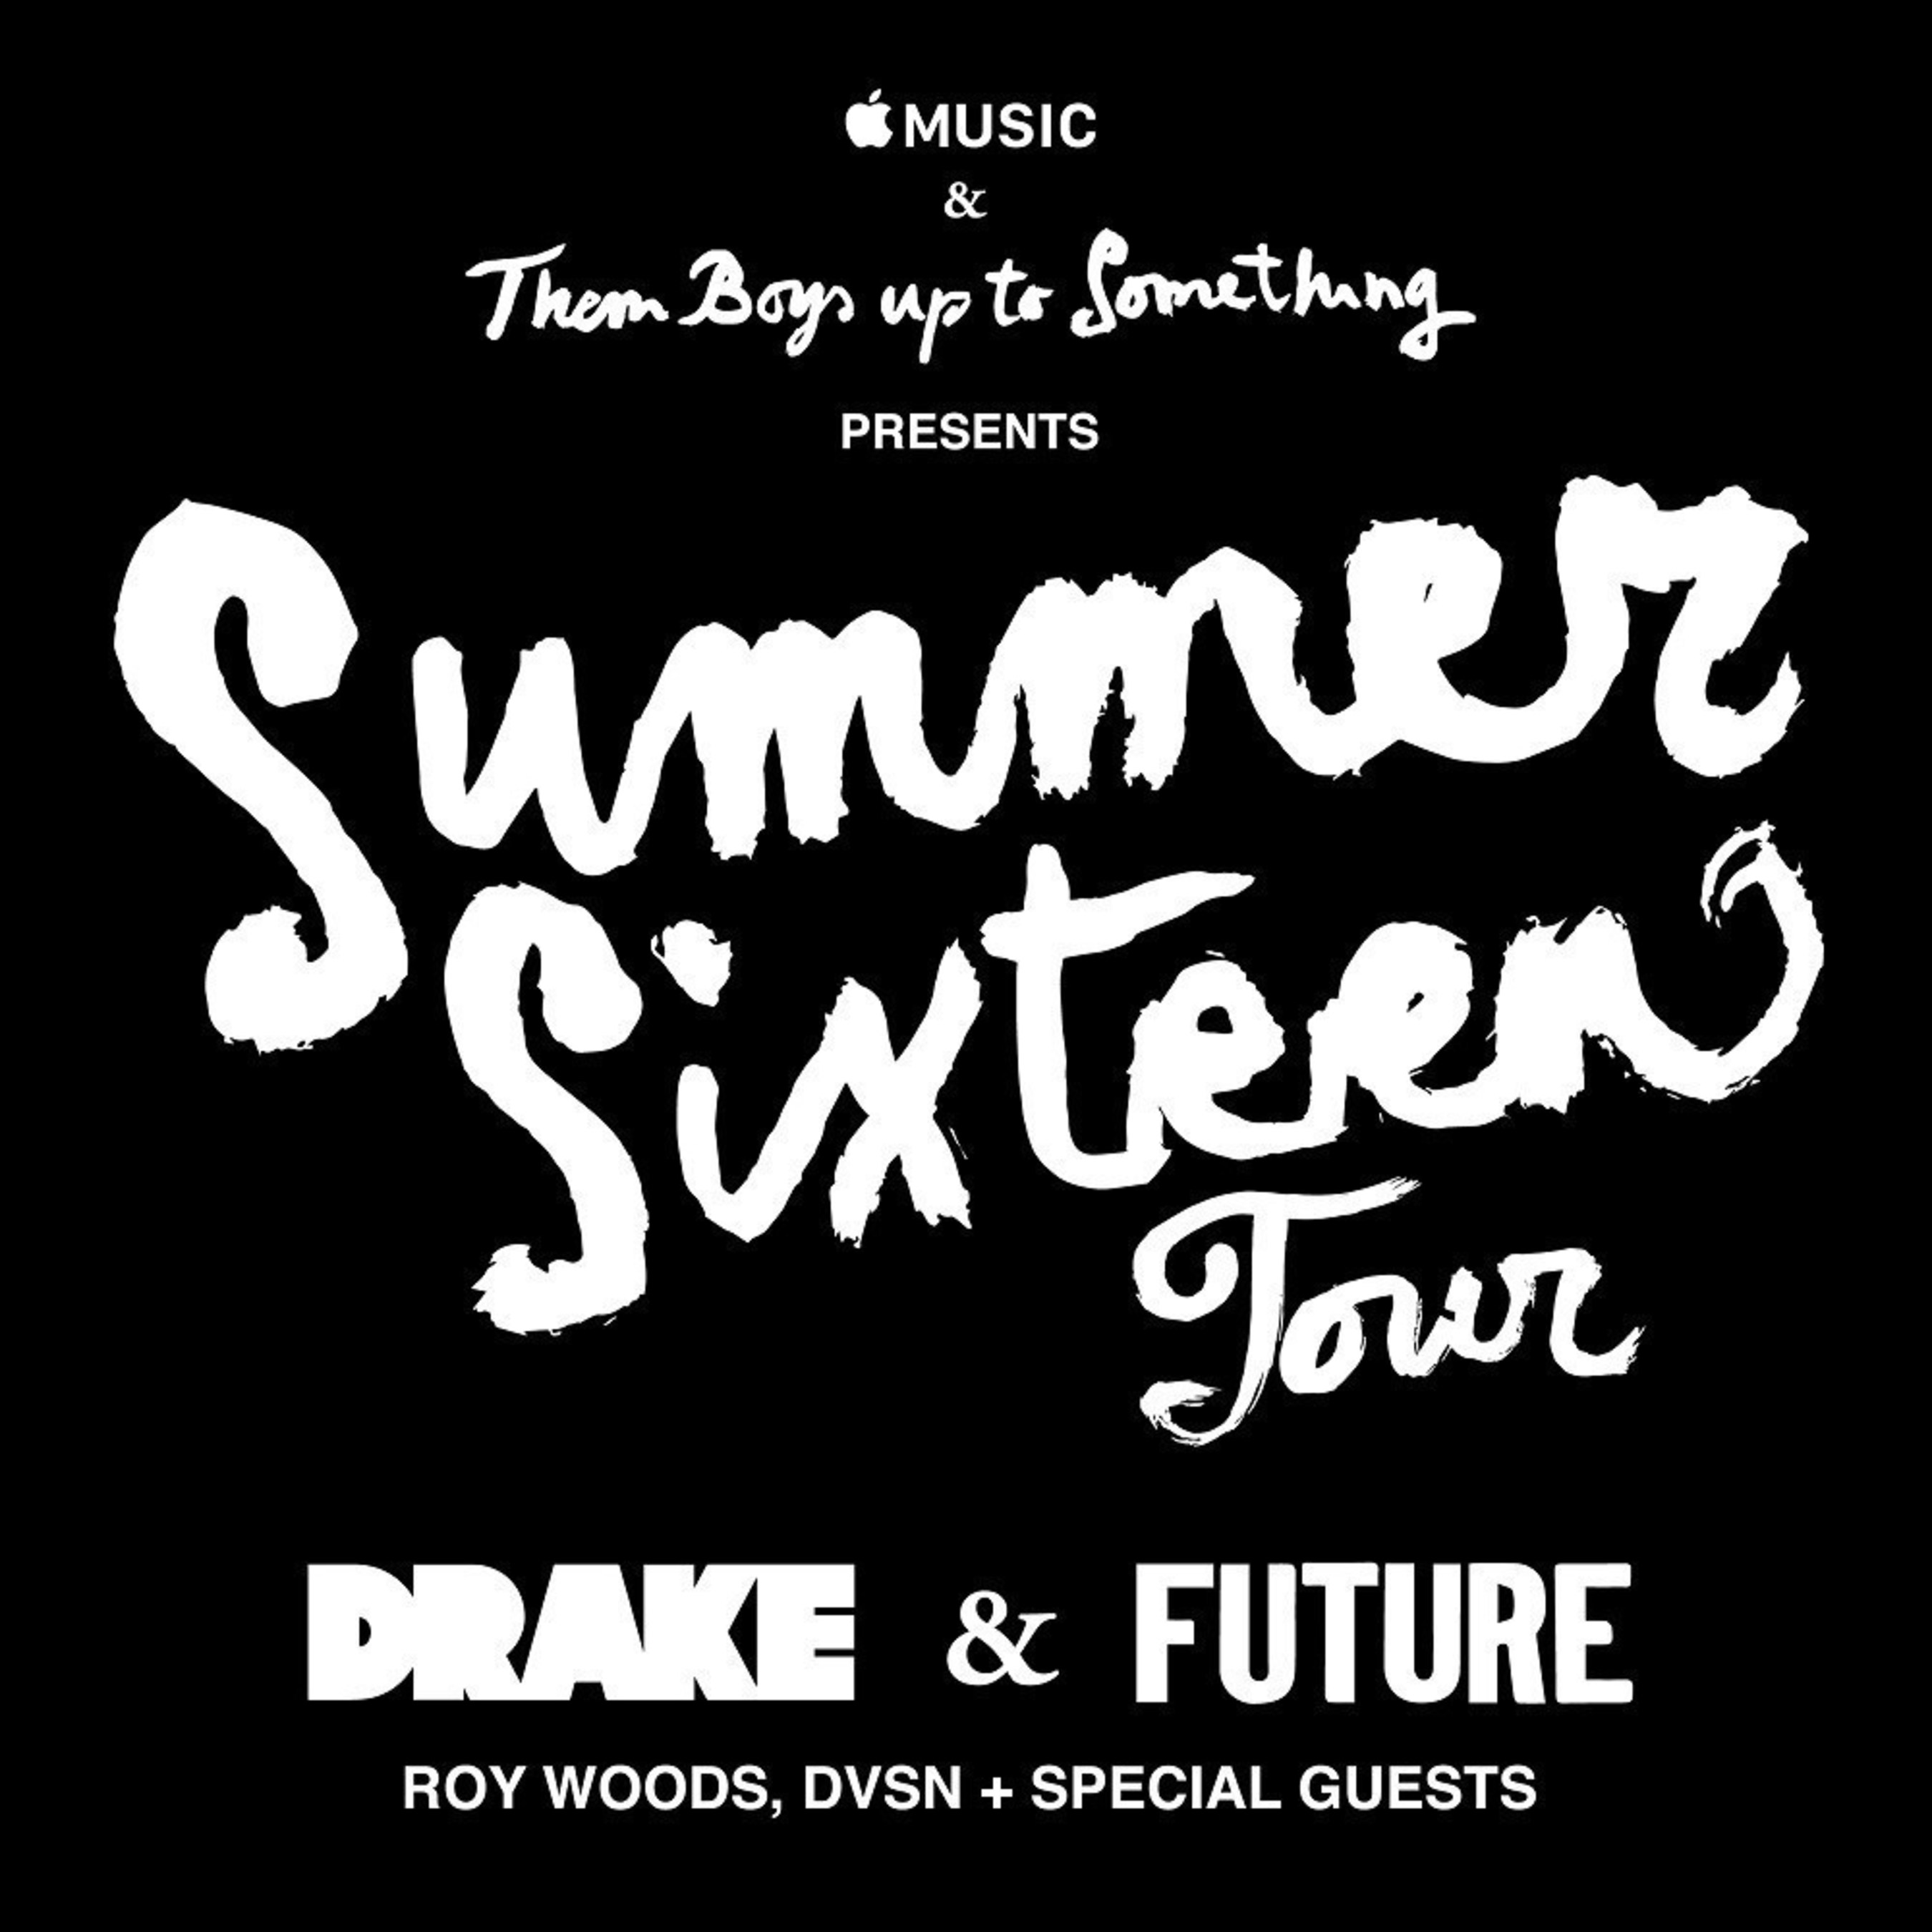 DRAKE TO LAUNCH SUMMER SIXTEEN TOUR WITH FUTURE AND SPECIAL GUESTS